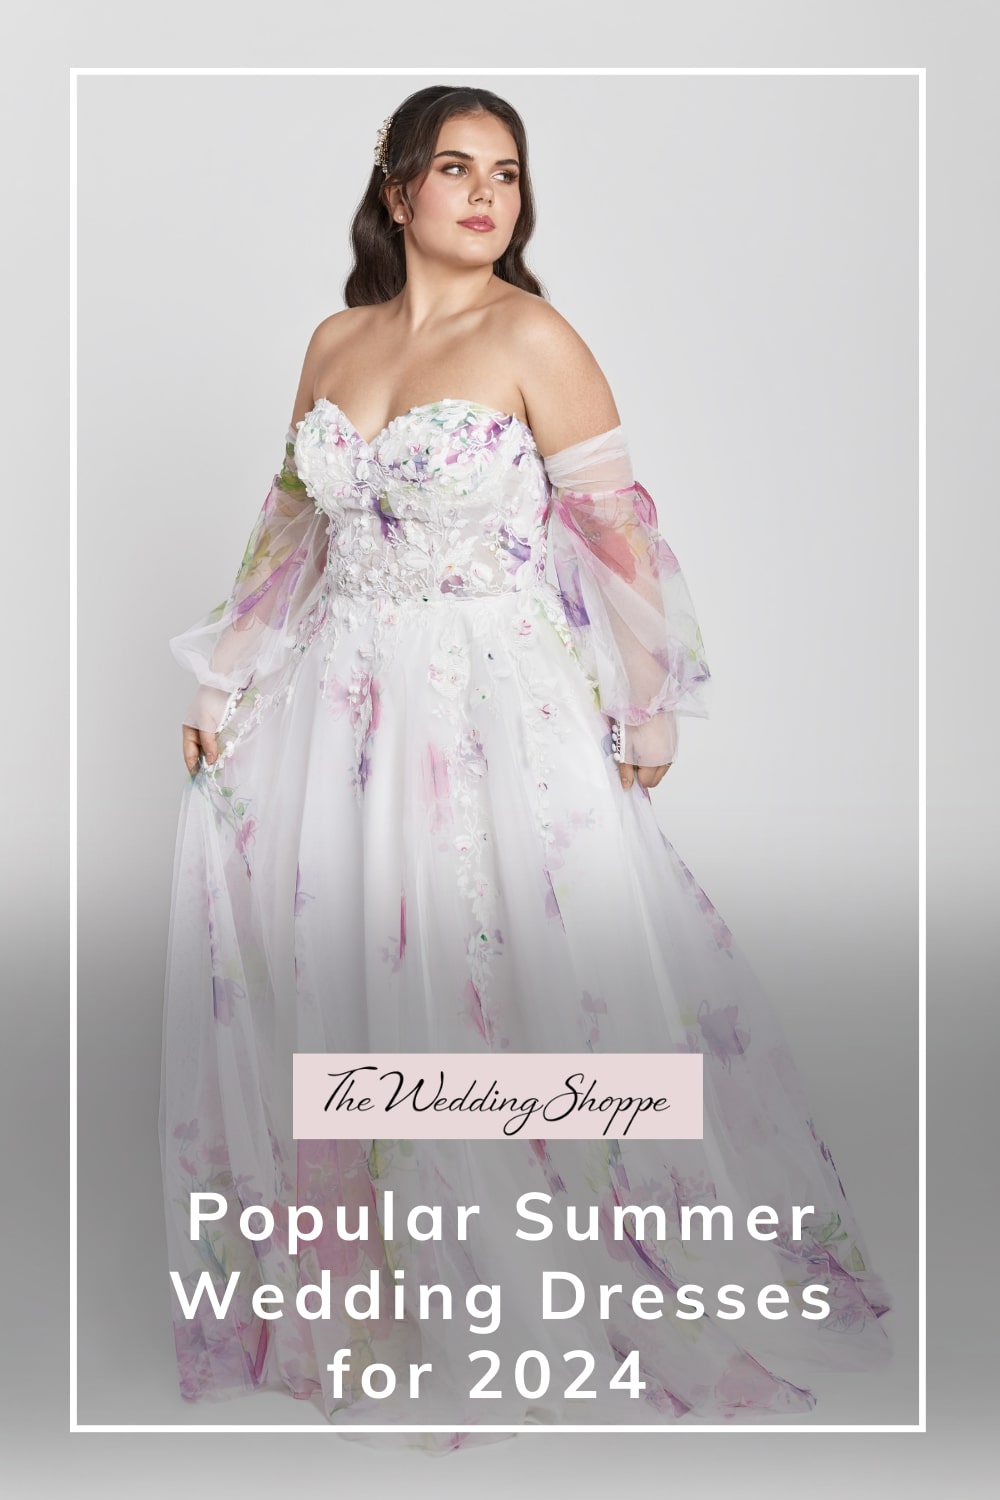 pinnable graphic for "Popular Summer Wedding Dresses for 2024" from The Wedding Shoppe